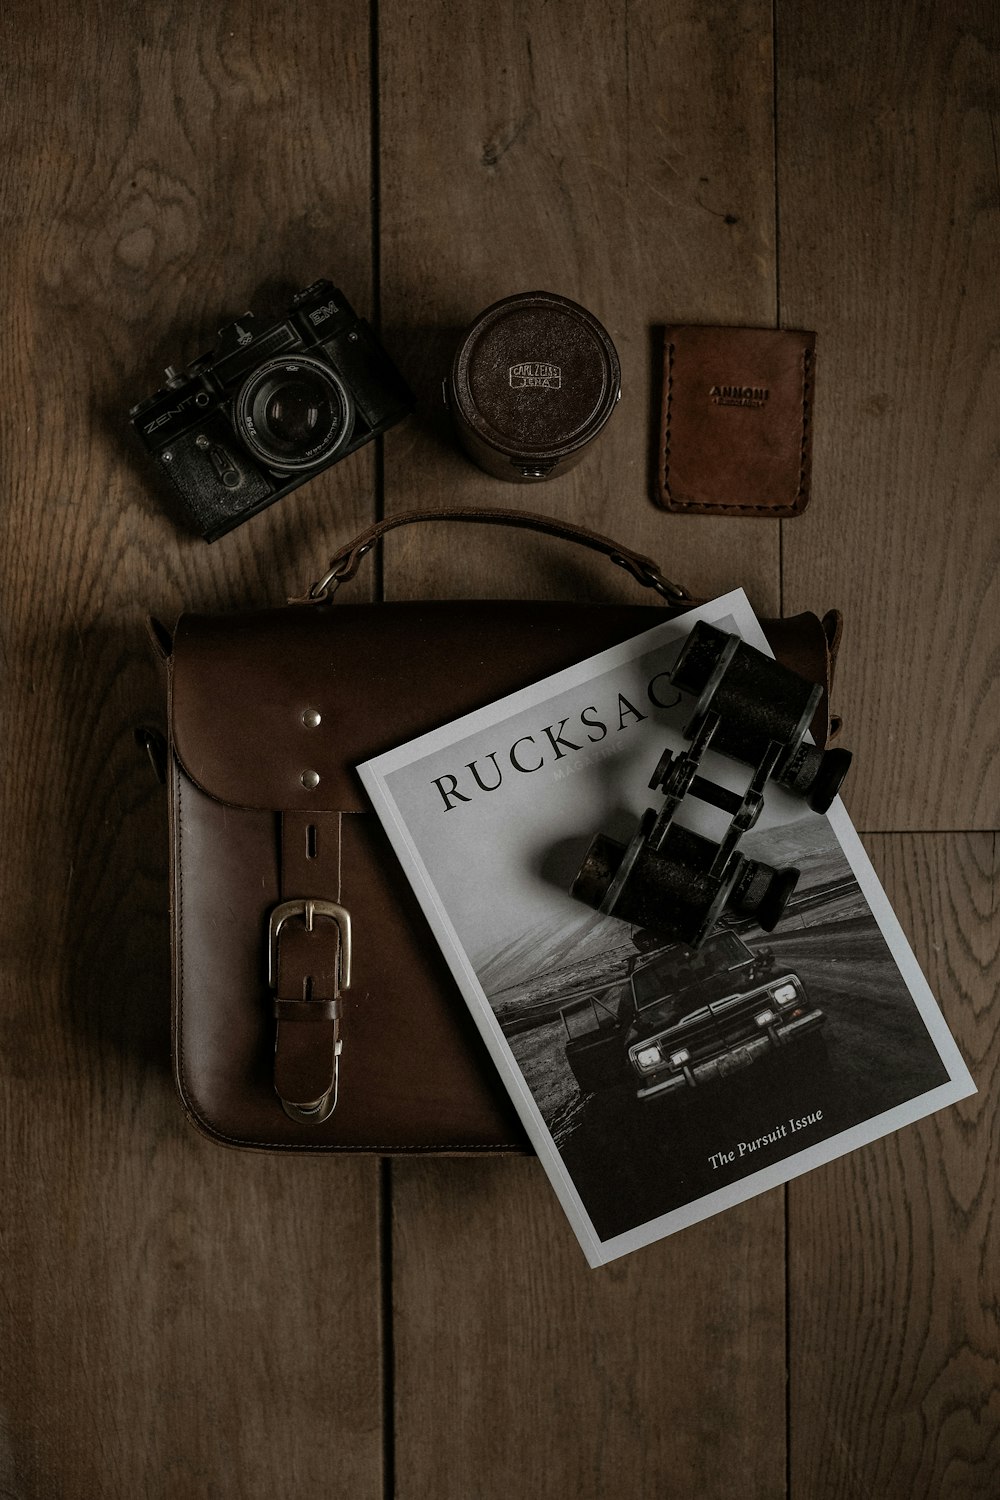 a camera and a book on a wooden floor